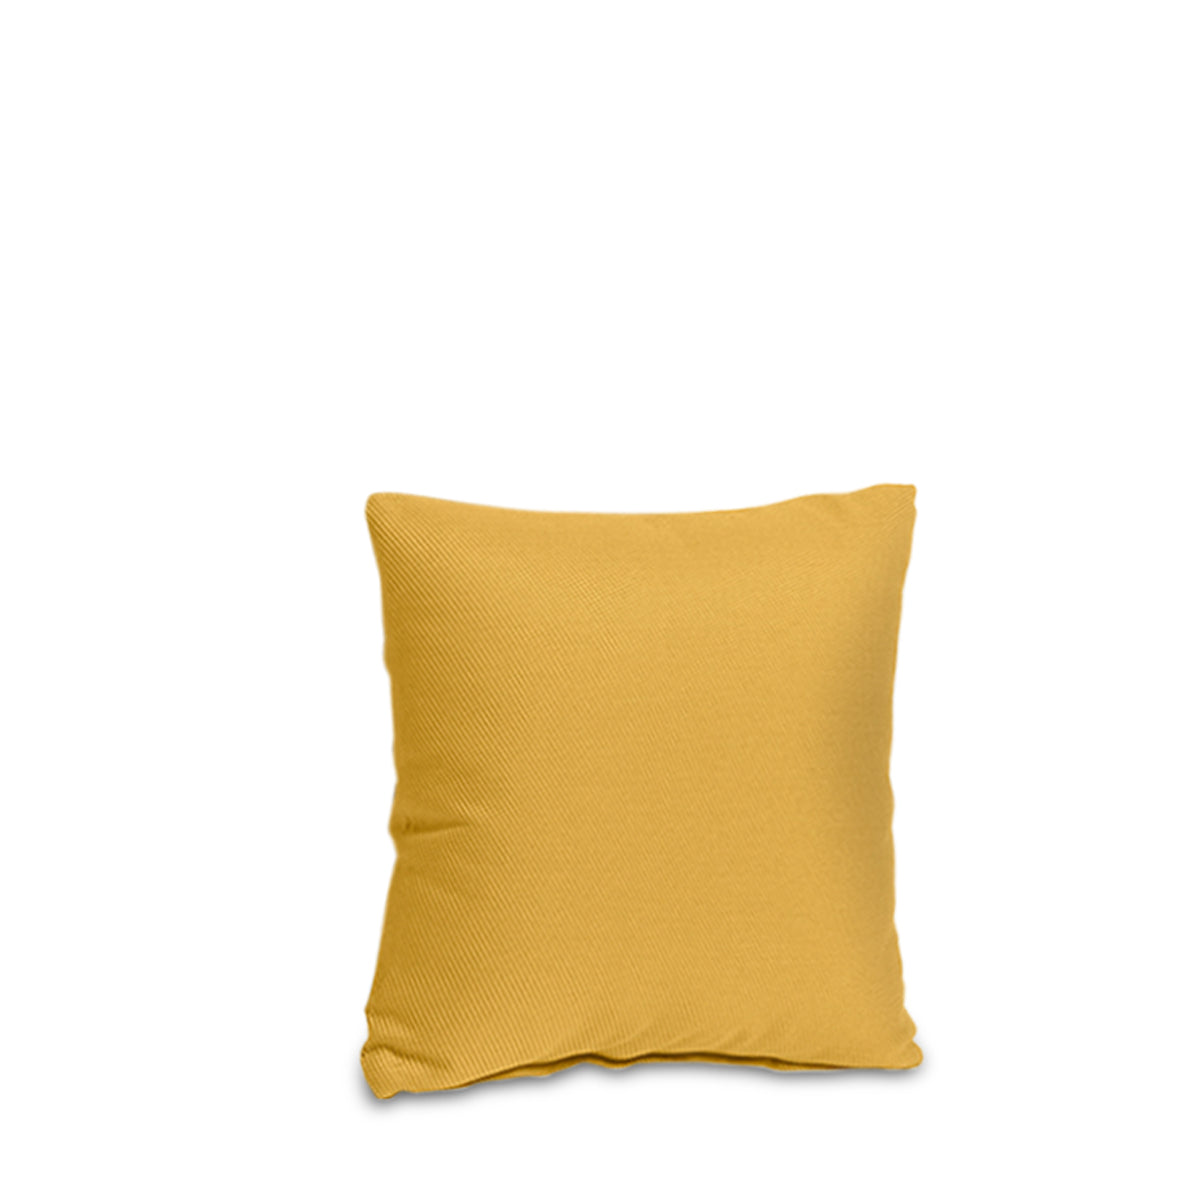 that's living outdoor small decorative outdoor pillows  yellow outdoor cushions 